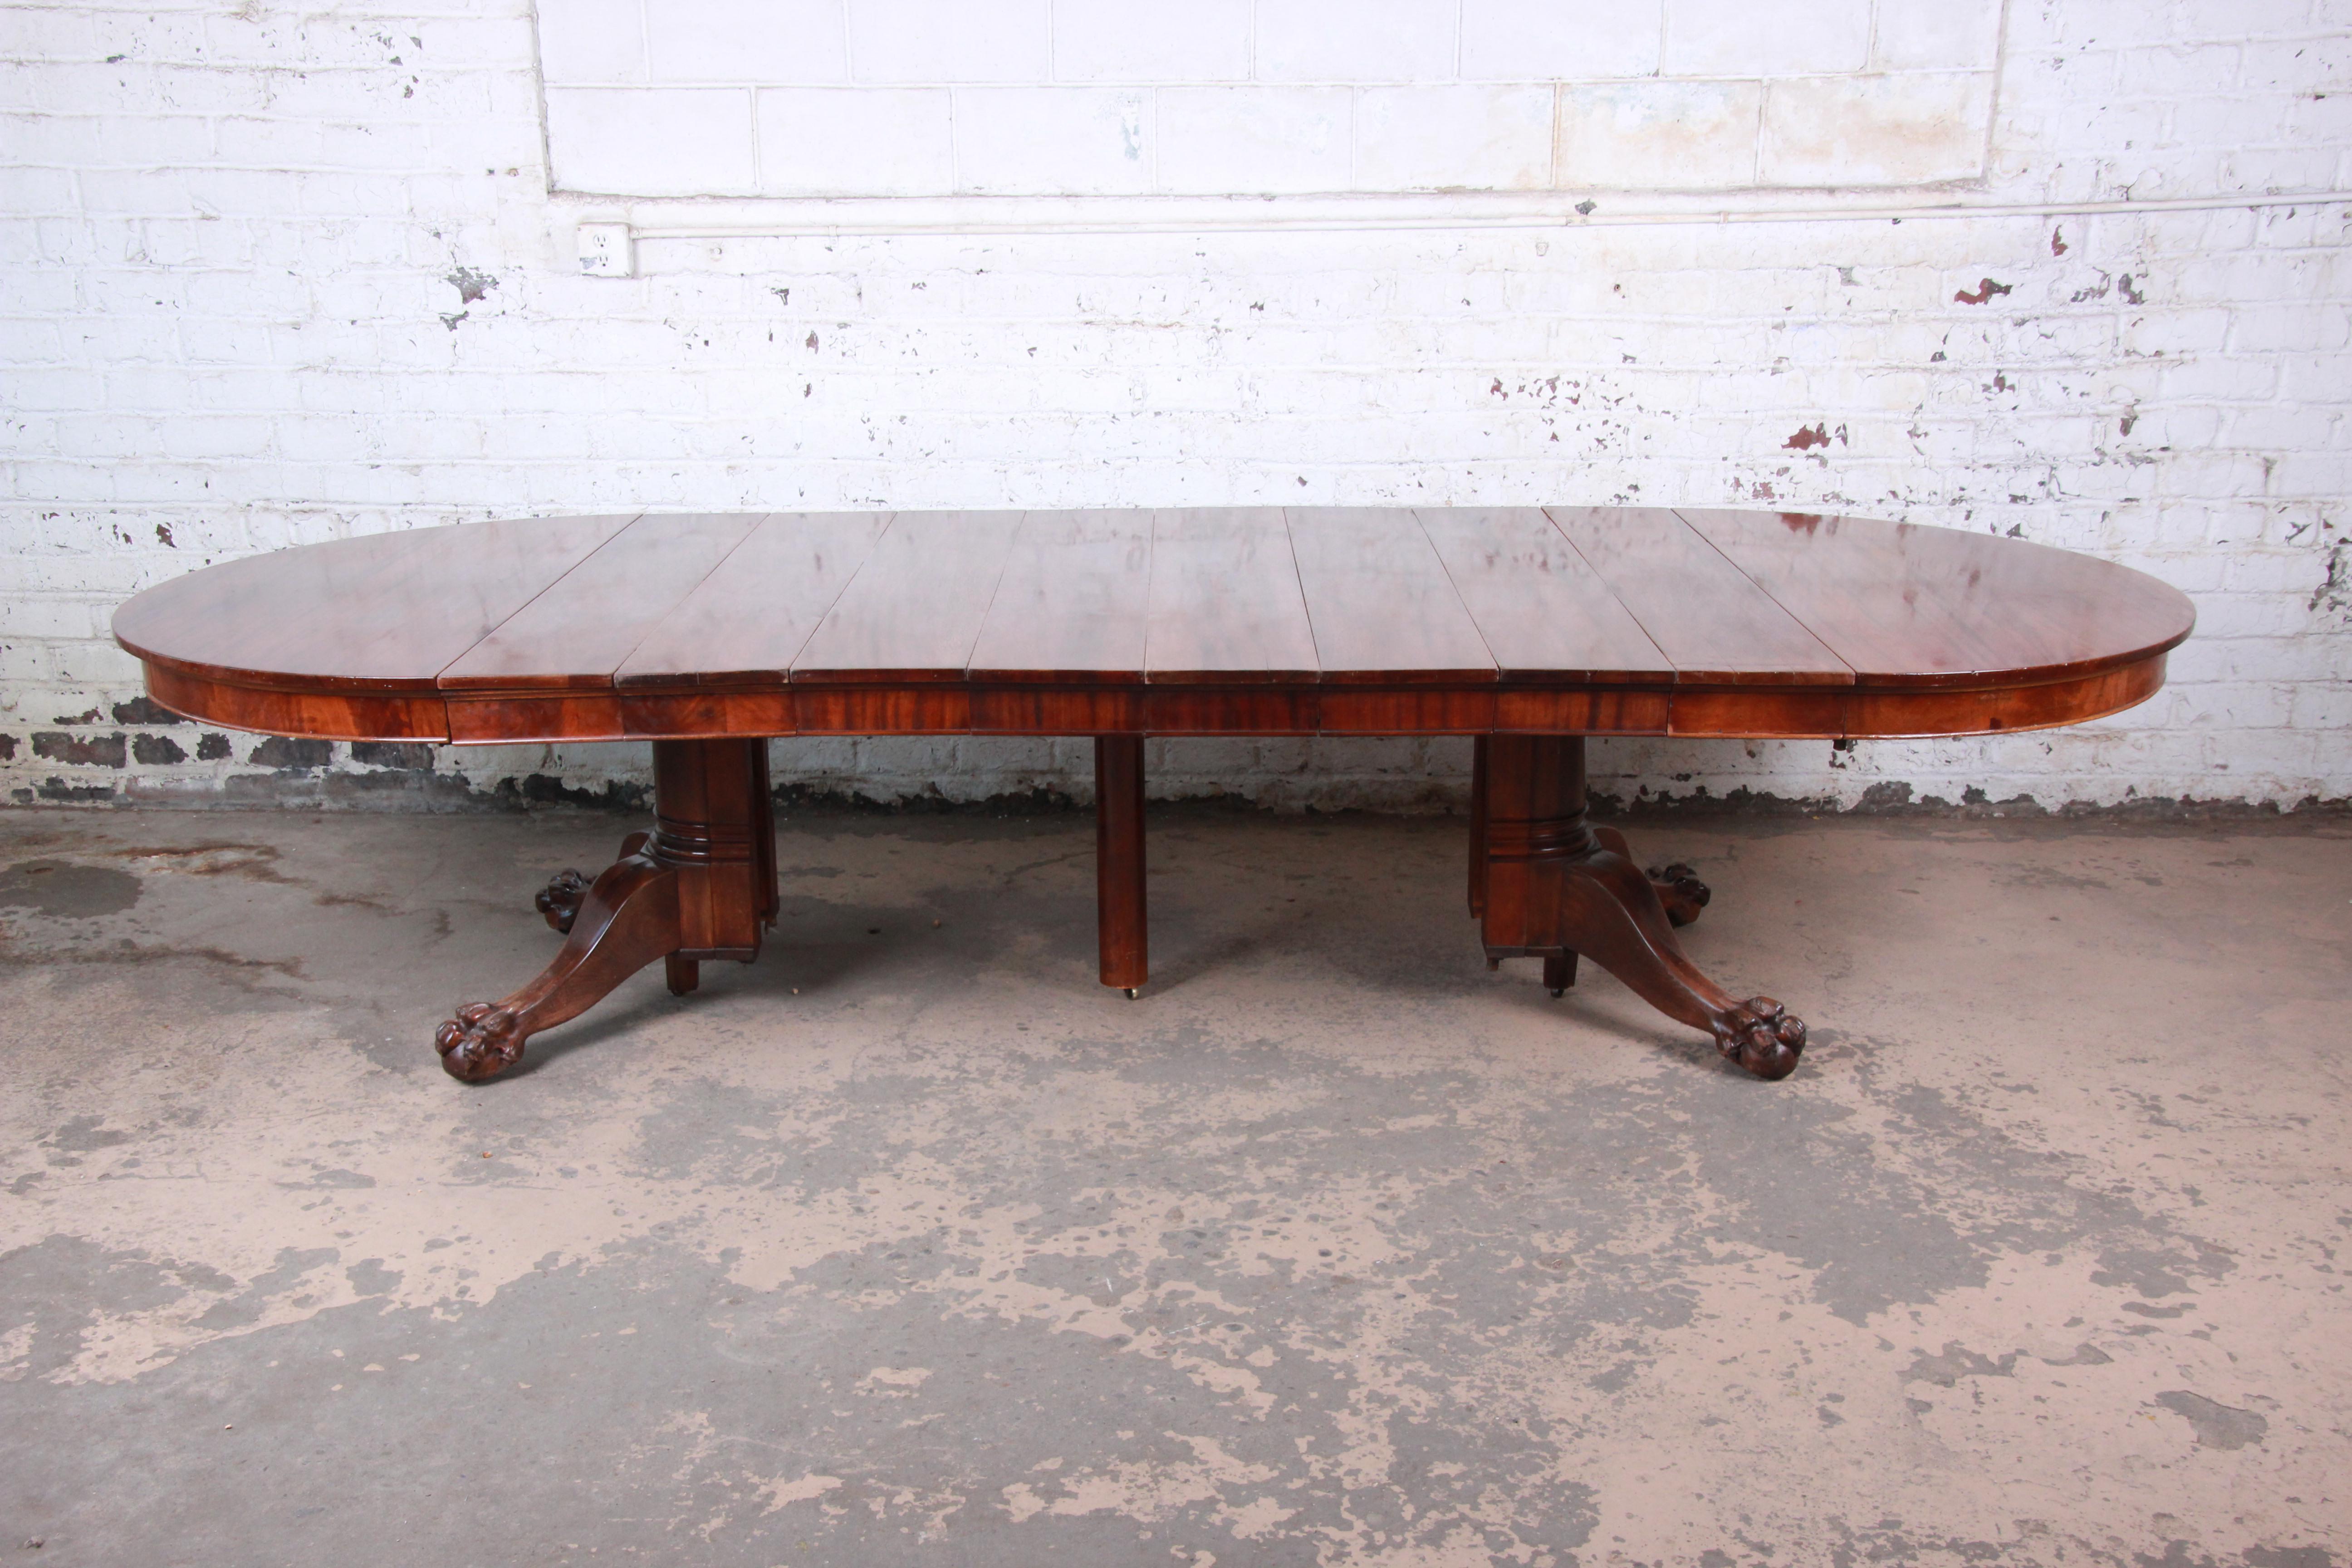 An outstanding antique mahogany extension dining table with carved paw feet. The table features gorgeous flame mahogany wood grain and a nice carved pedestal. It measures 54.5